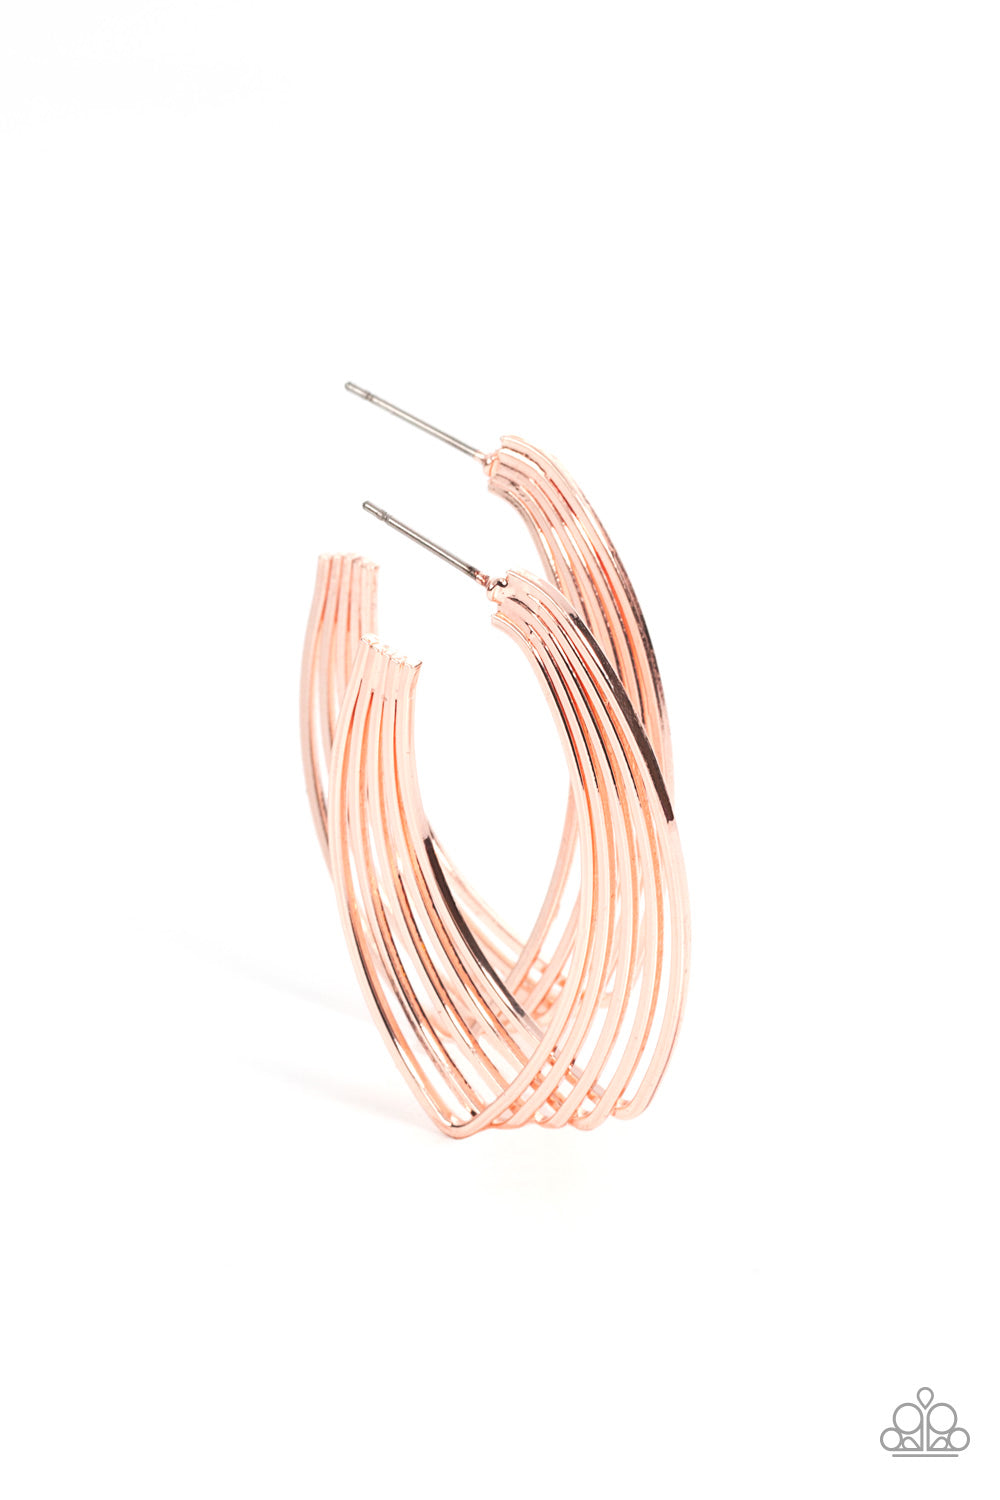 Paparazzi Industrial Illusion Rose Gold Post Hoop Earrings - P5HO-GDRS-198XX